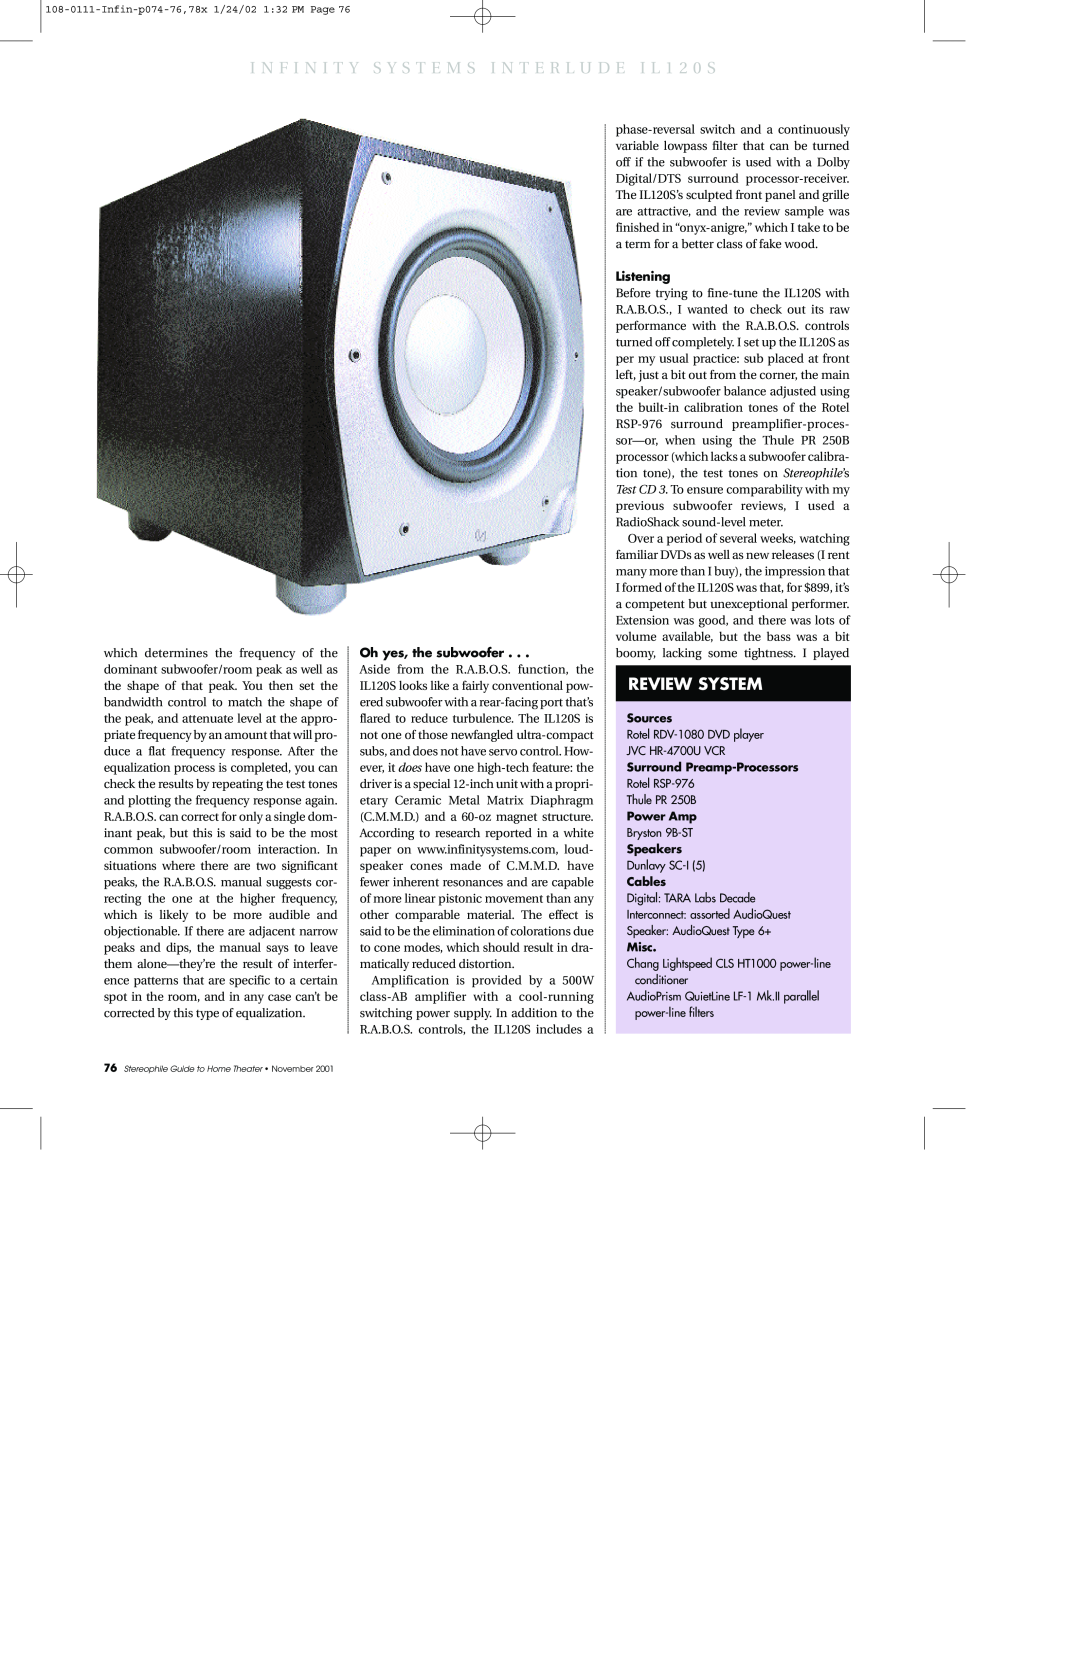 3D Connexion IL120s specifications Review System, Oh yes, the subwoofer, Listening 